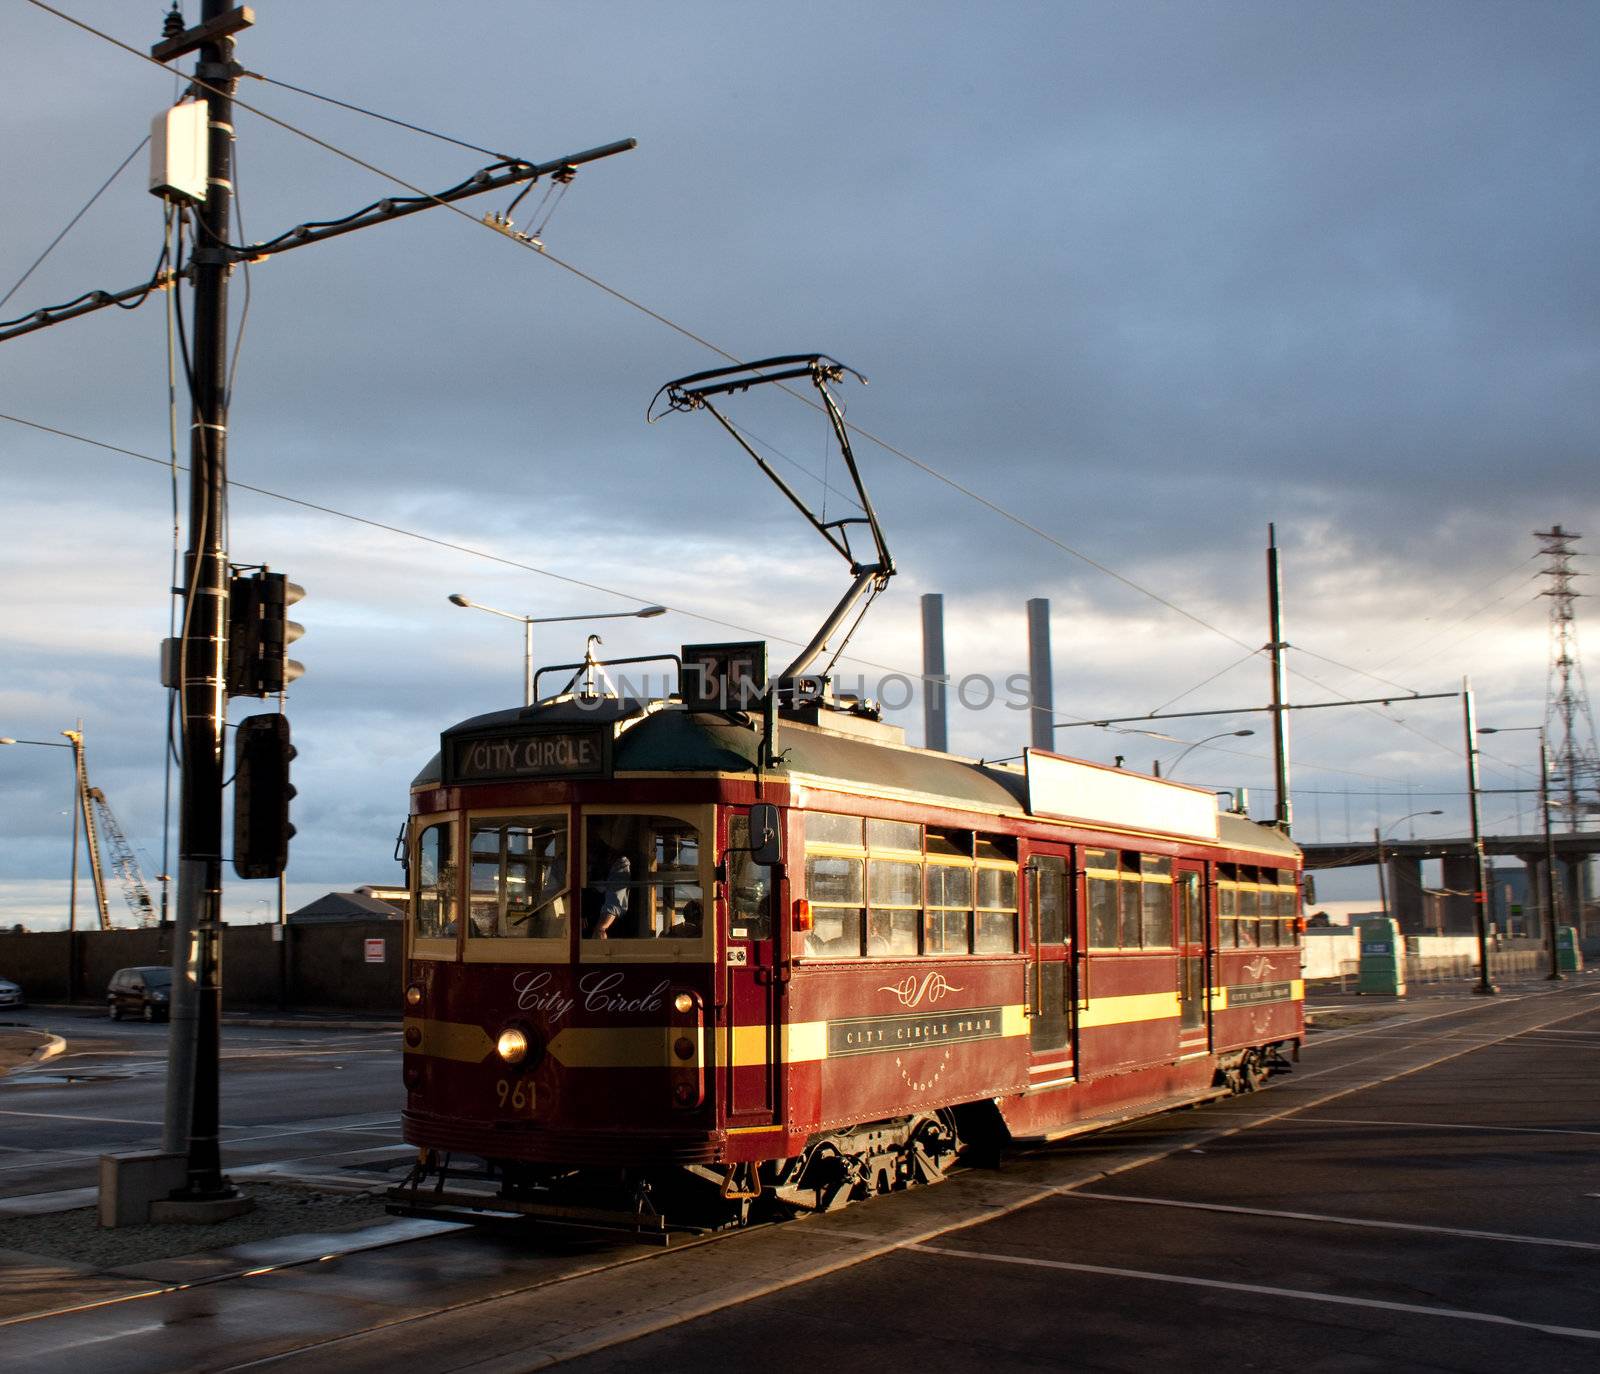 Melbourne's City Circle Tram, a free service for visitors